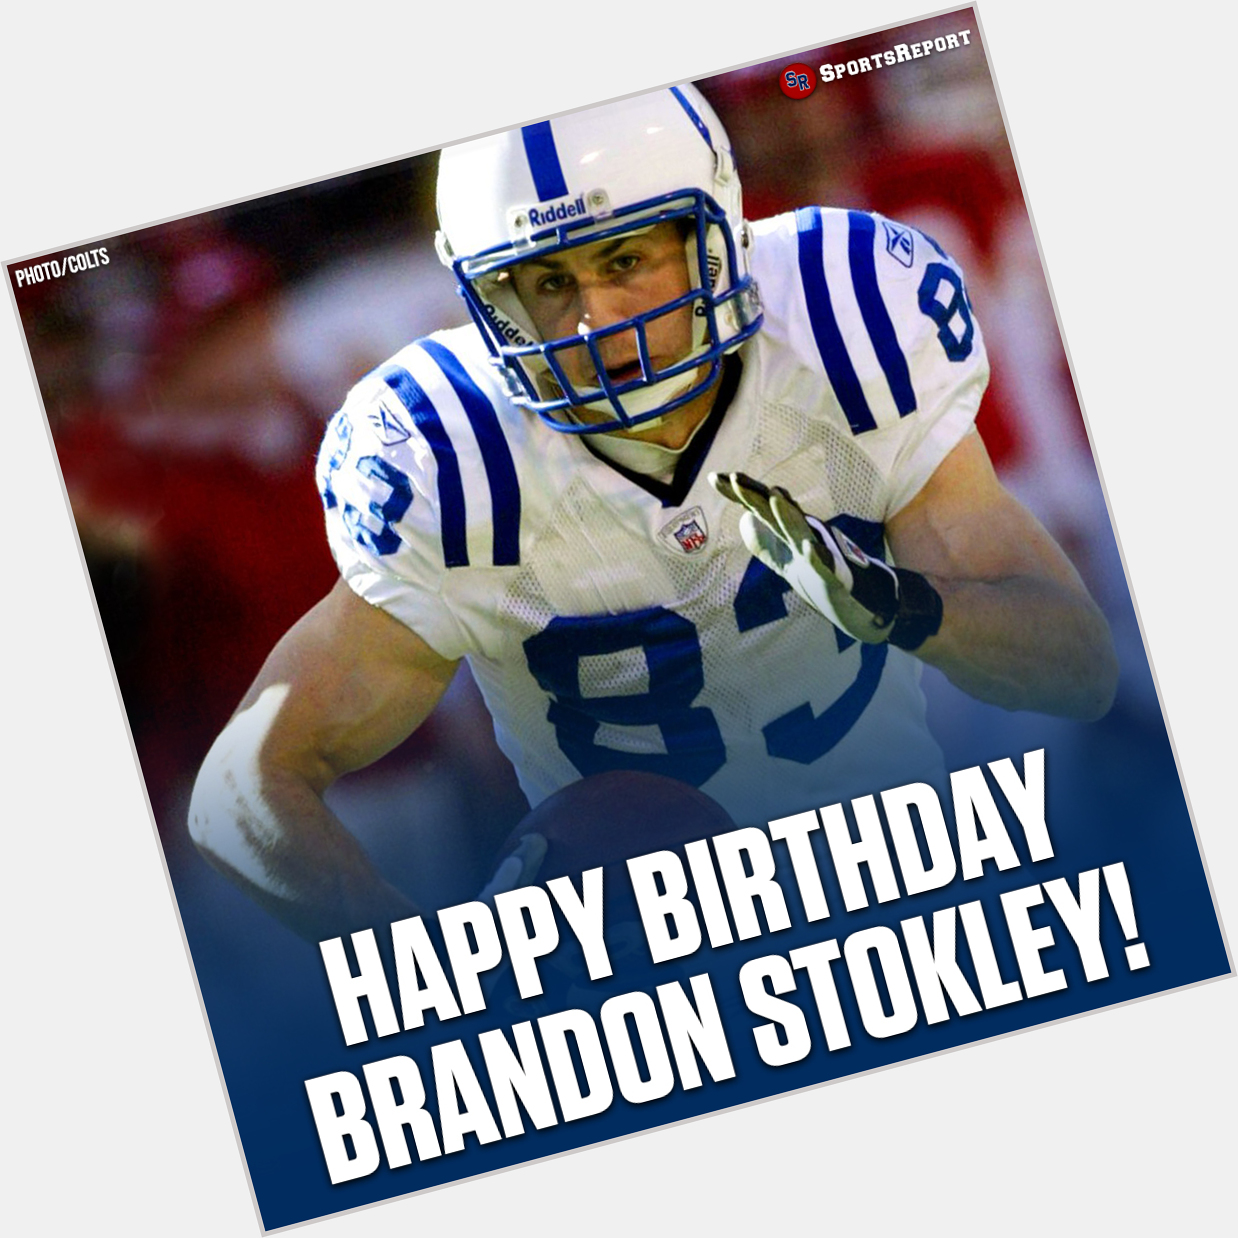 Colts Fans, let\s wish great Brandon Stokley a Happy Birthday! 